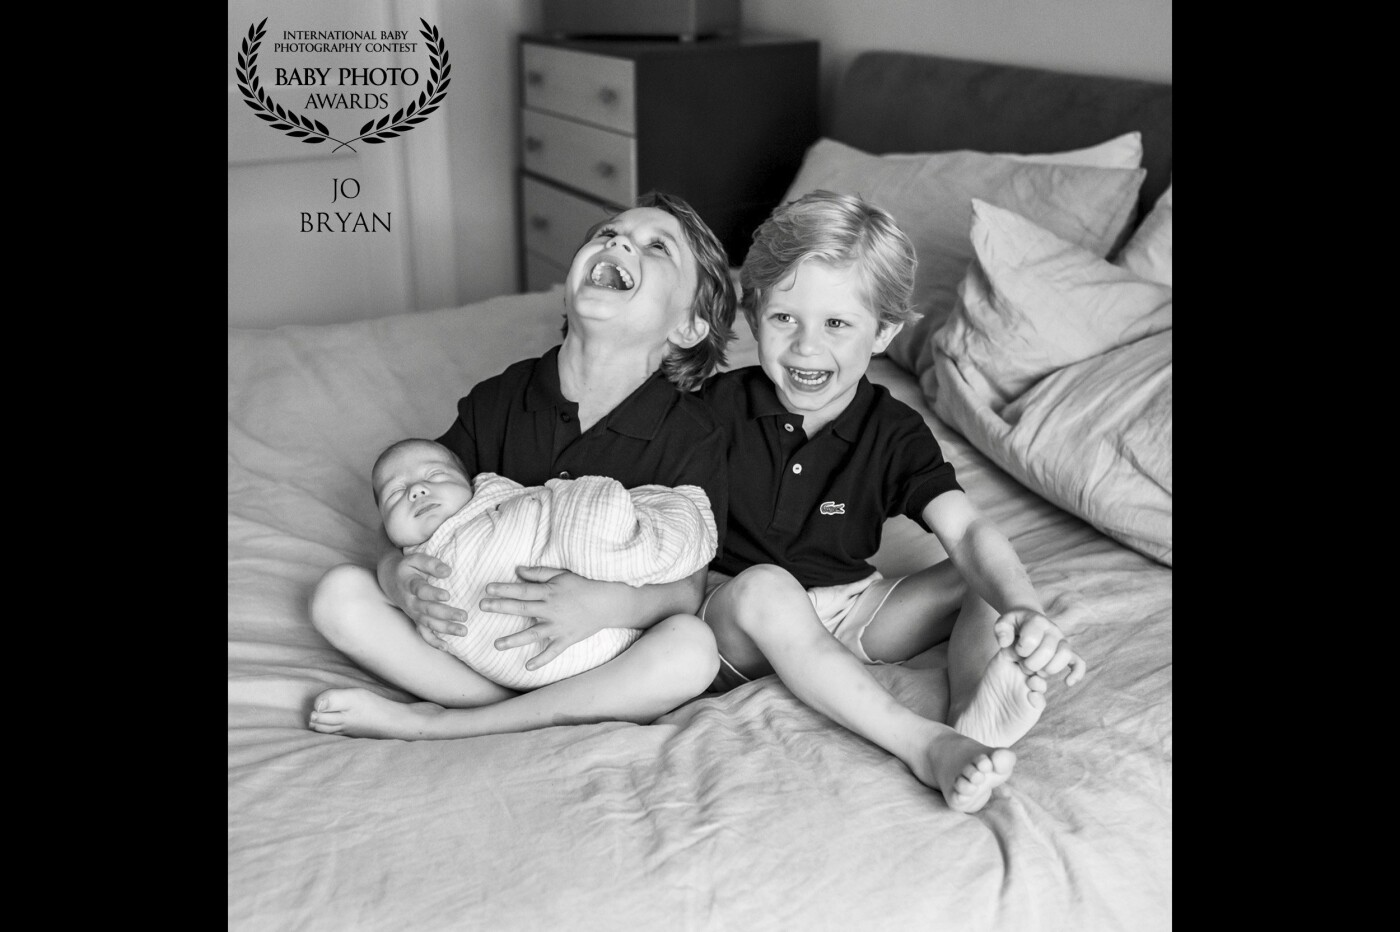 Another fun Newborn Lifestyle session with 3 boys welcoming their baby sister to the family (the younger one had disappeared to grab something to eat!). I get the strong feeling this little one is going to have fun growing up with 3  older brothers looking out for her!